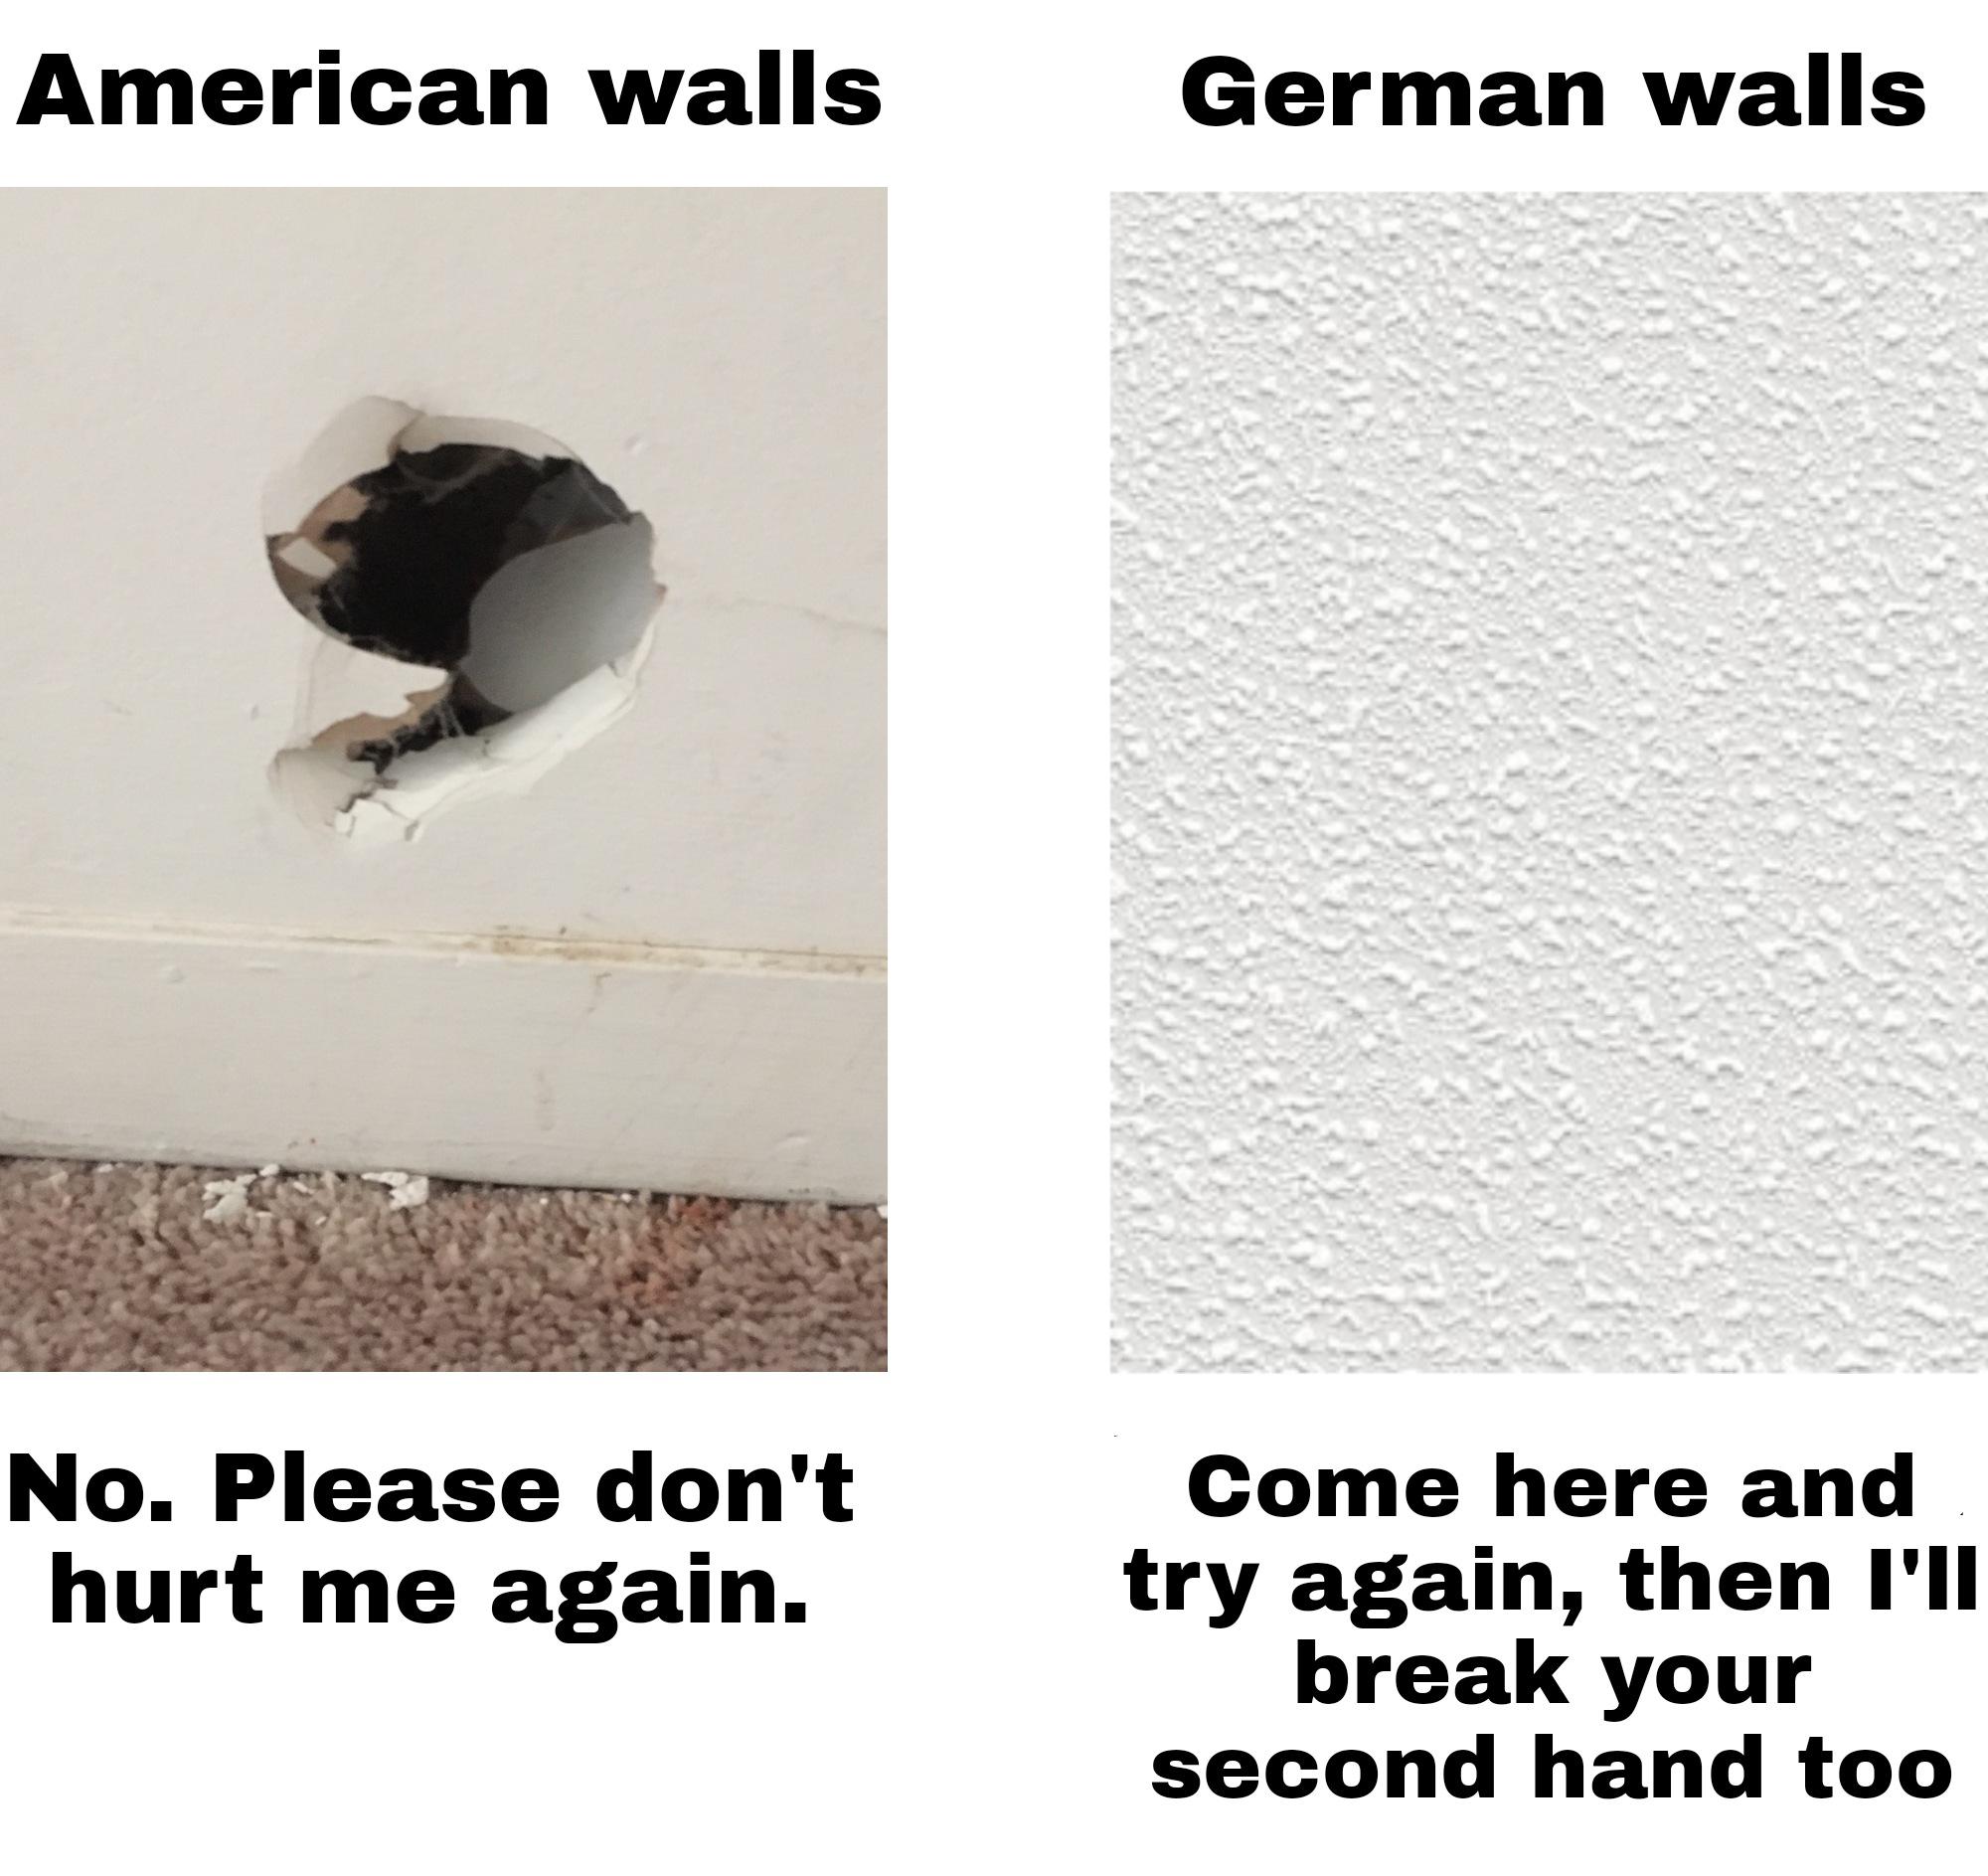 monday morning randomness - american walls vs german walls - American walls No. Please don't hurt me again. German walls Come here and try again, then I'll break your second hand too